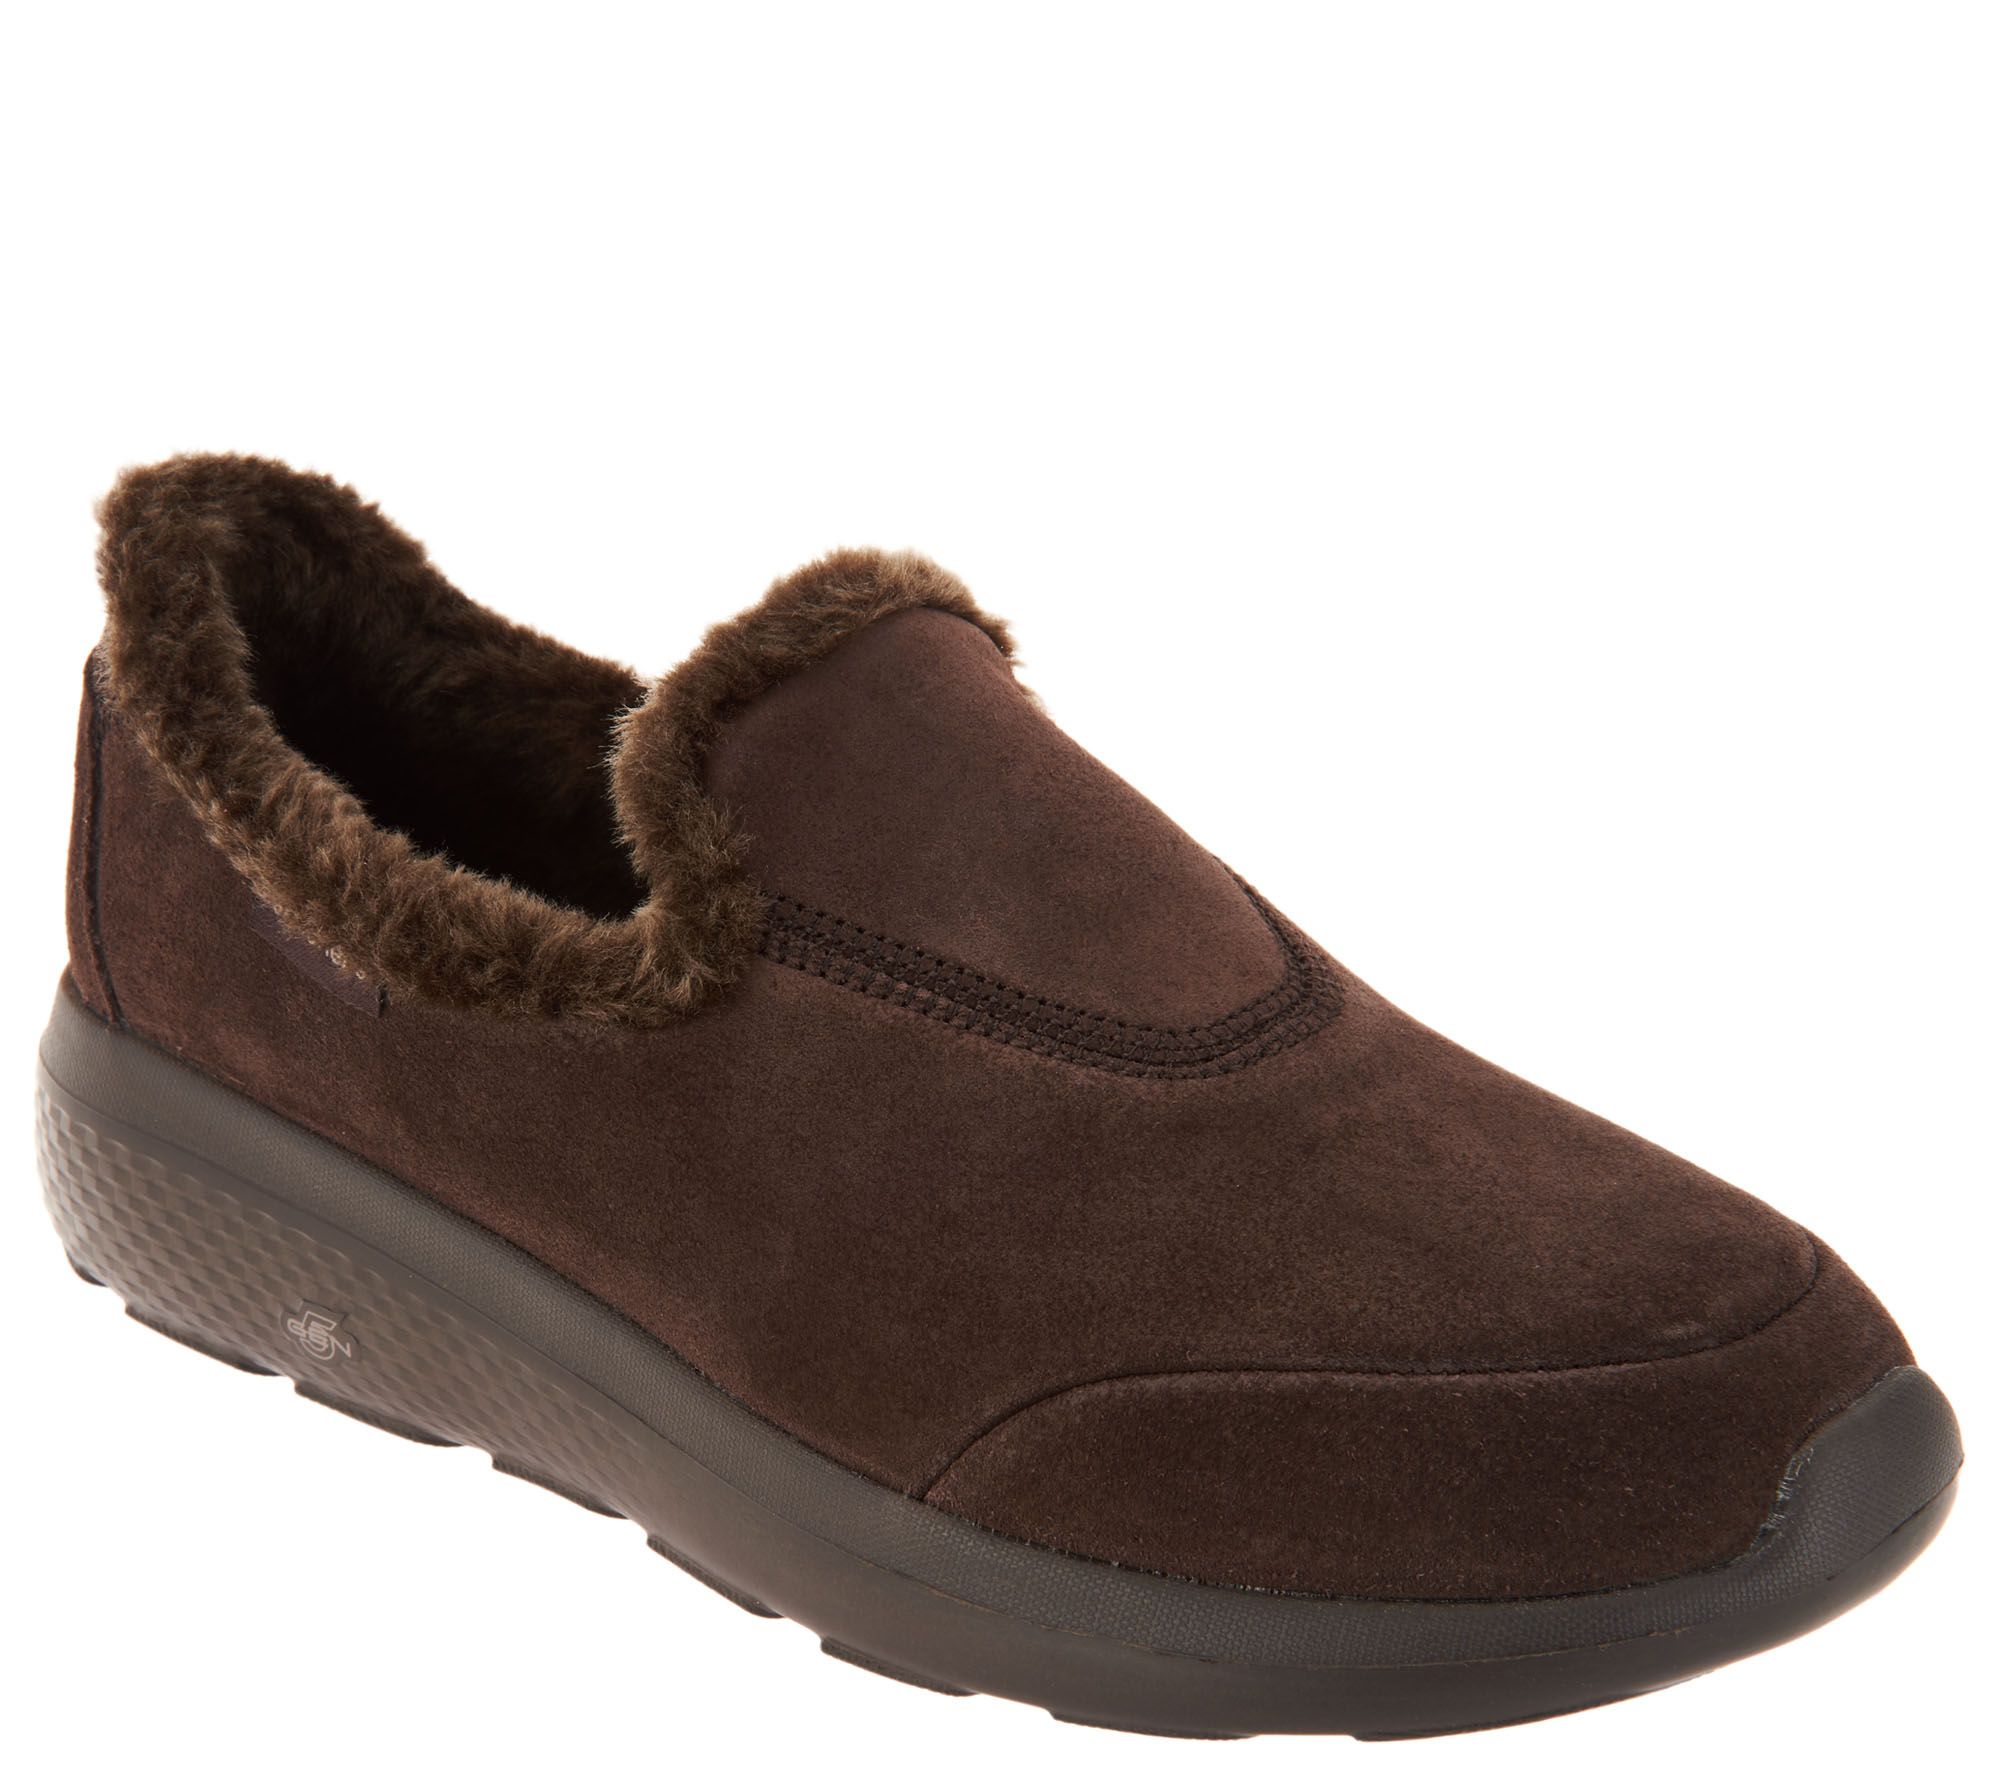 skechers go walk suede slip on shoes with faux fur